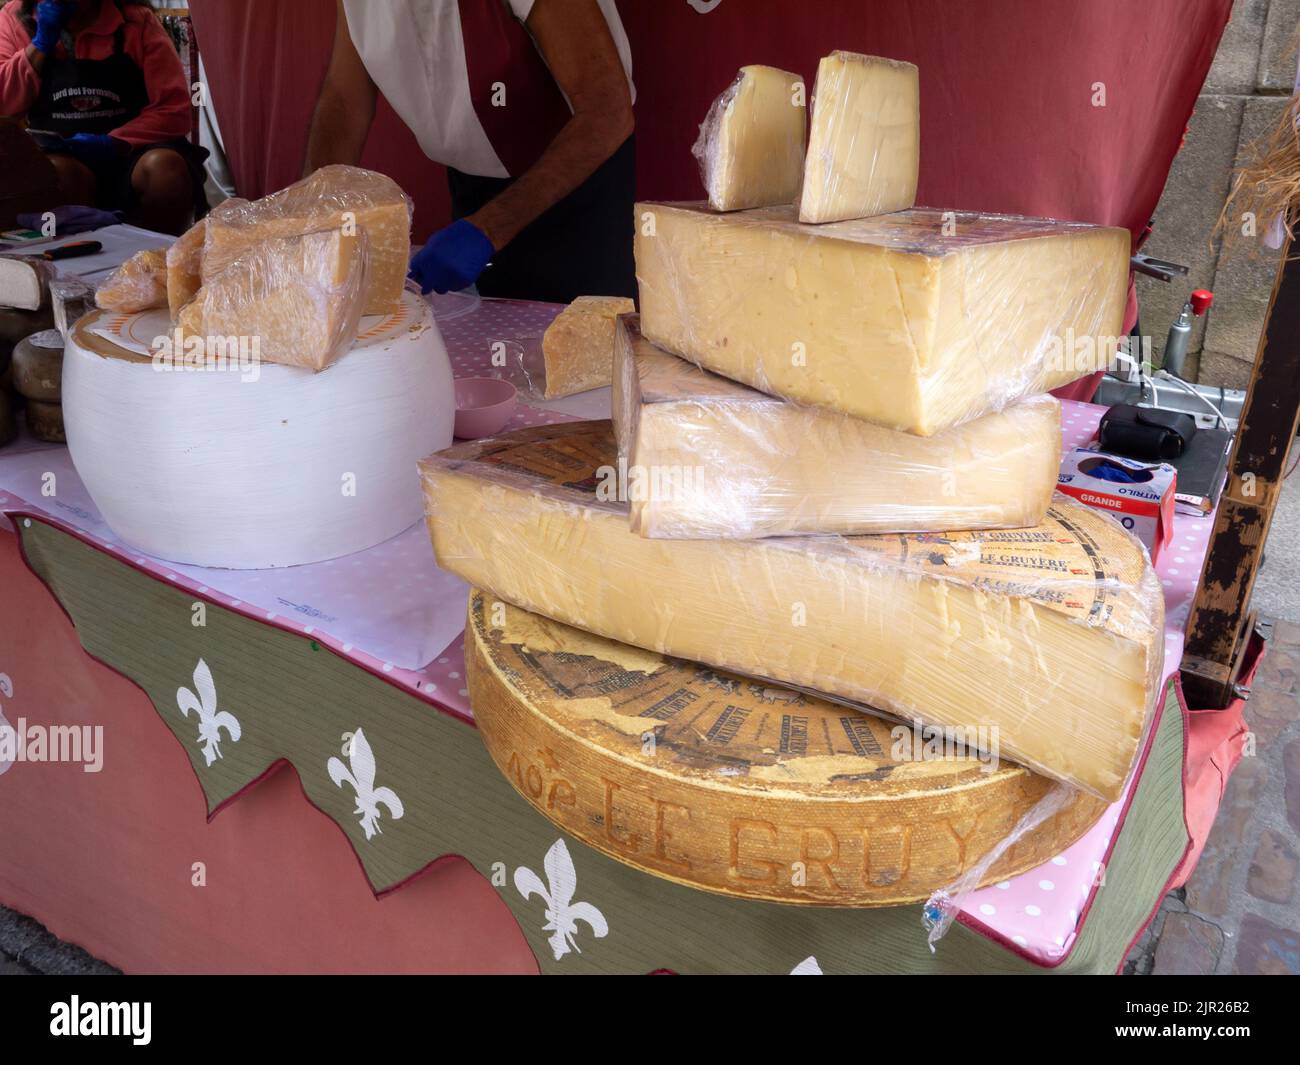 MONDONEDO, SPAIN - AUGUST 14, 2022: Imported gourmet cheese at the medieval fair counter in the old town Mondonedo,Lugo,Galicia,Spain Stock Photo